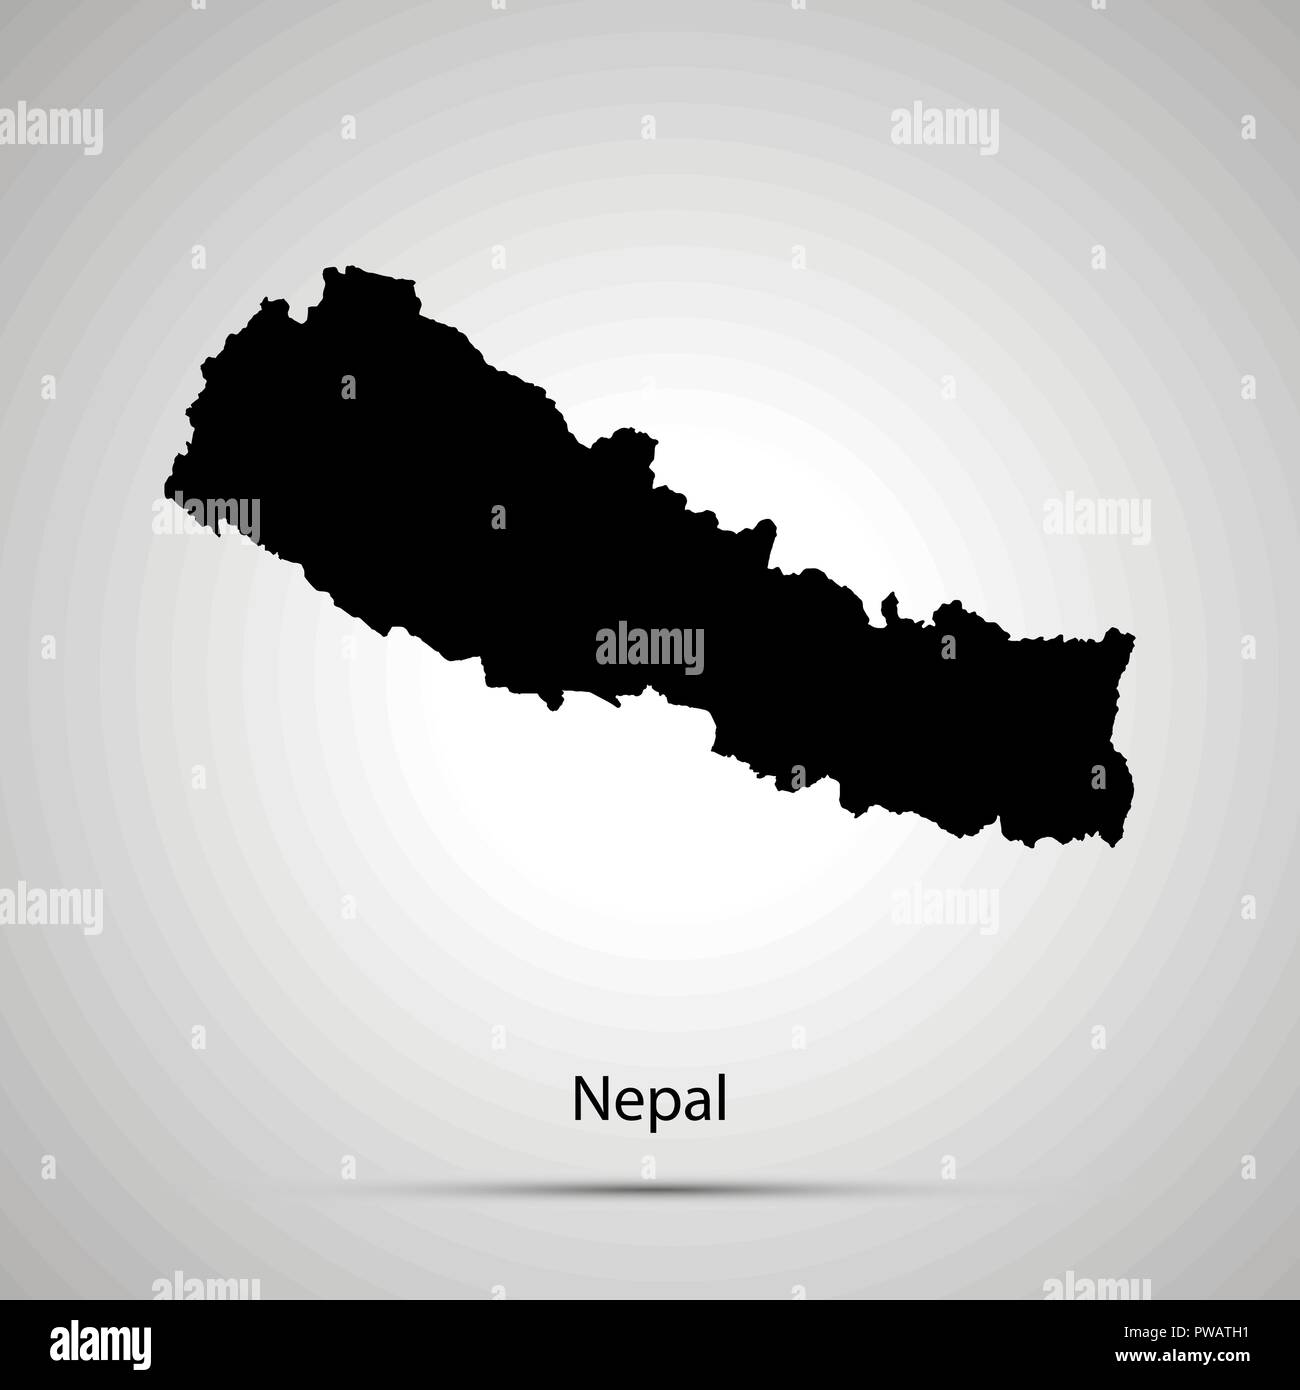 Nepal country map, simple black silhouette Stock Vector